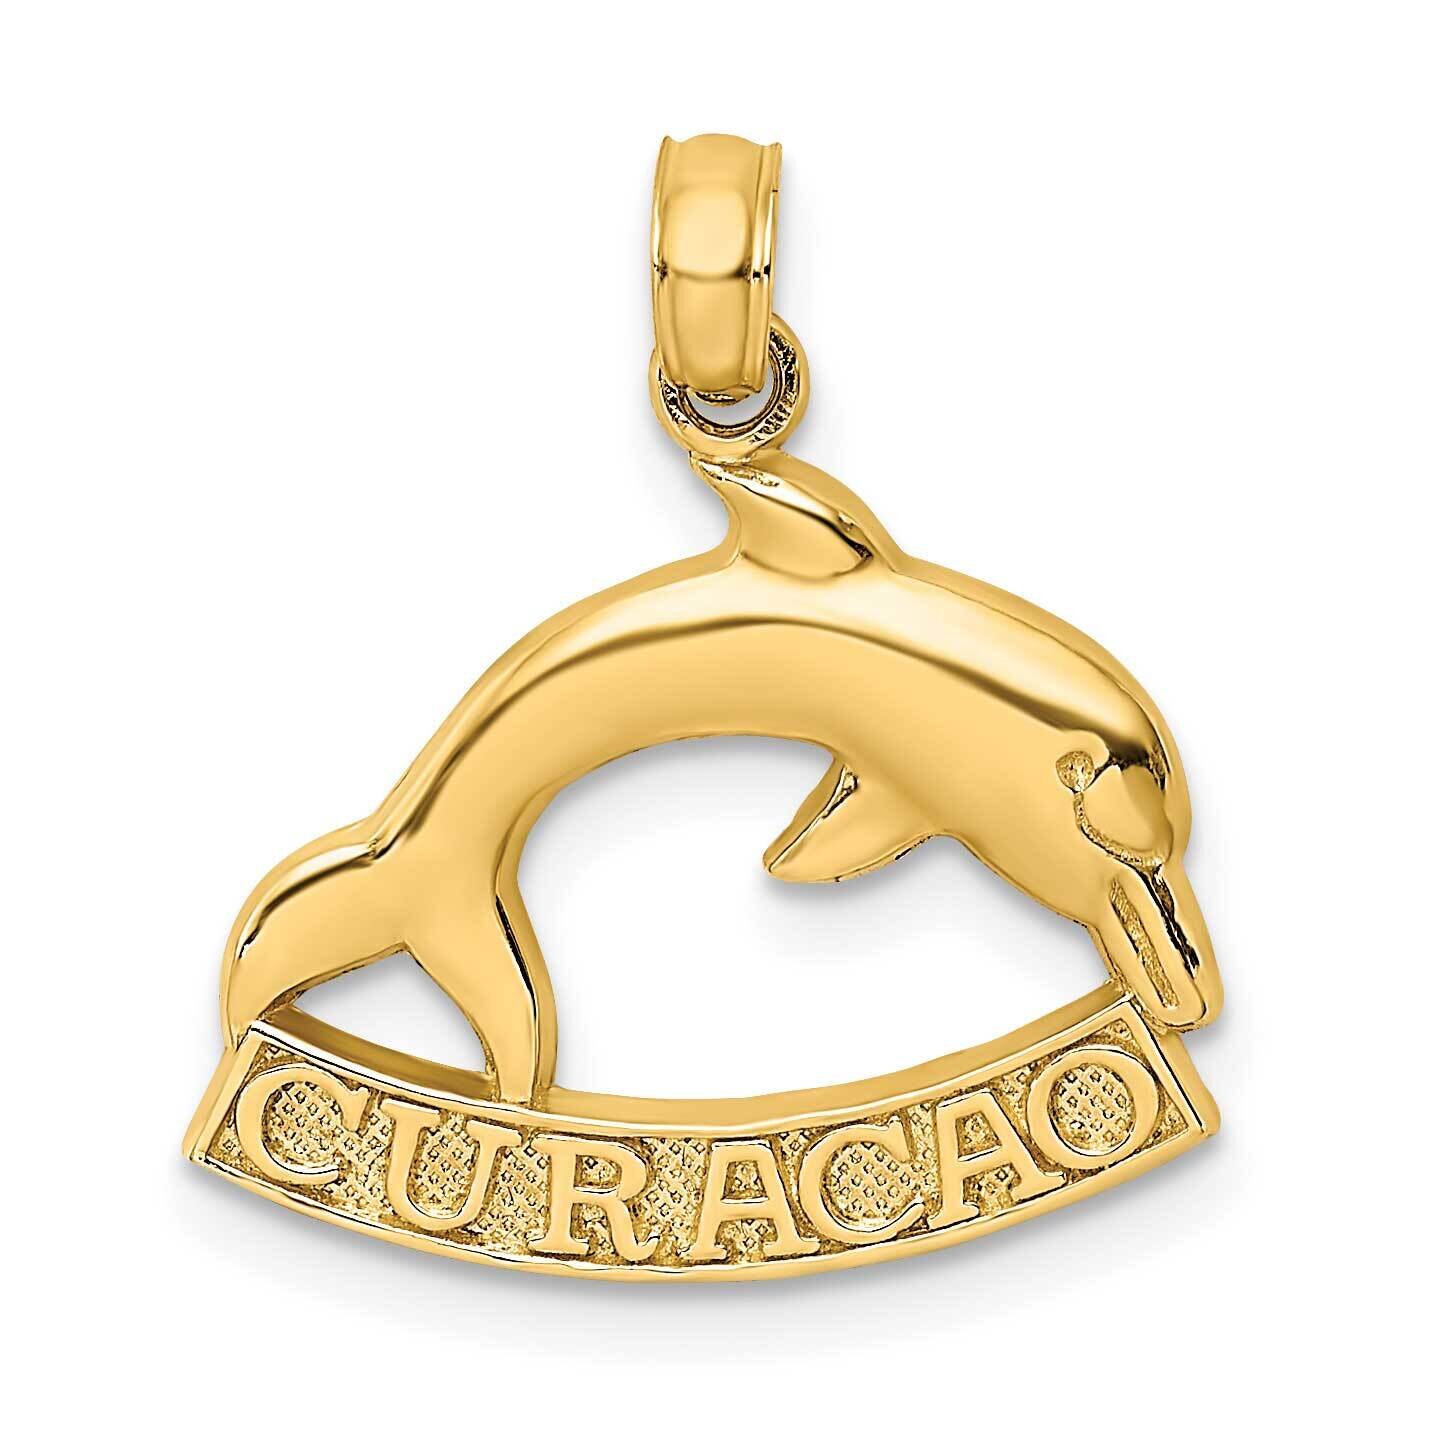 Curacao Under Polished Dolphin Charm 14k Gold 2-D K8221